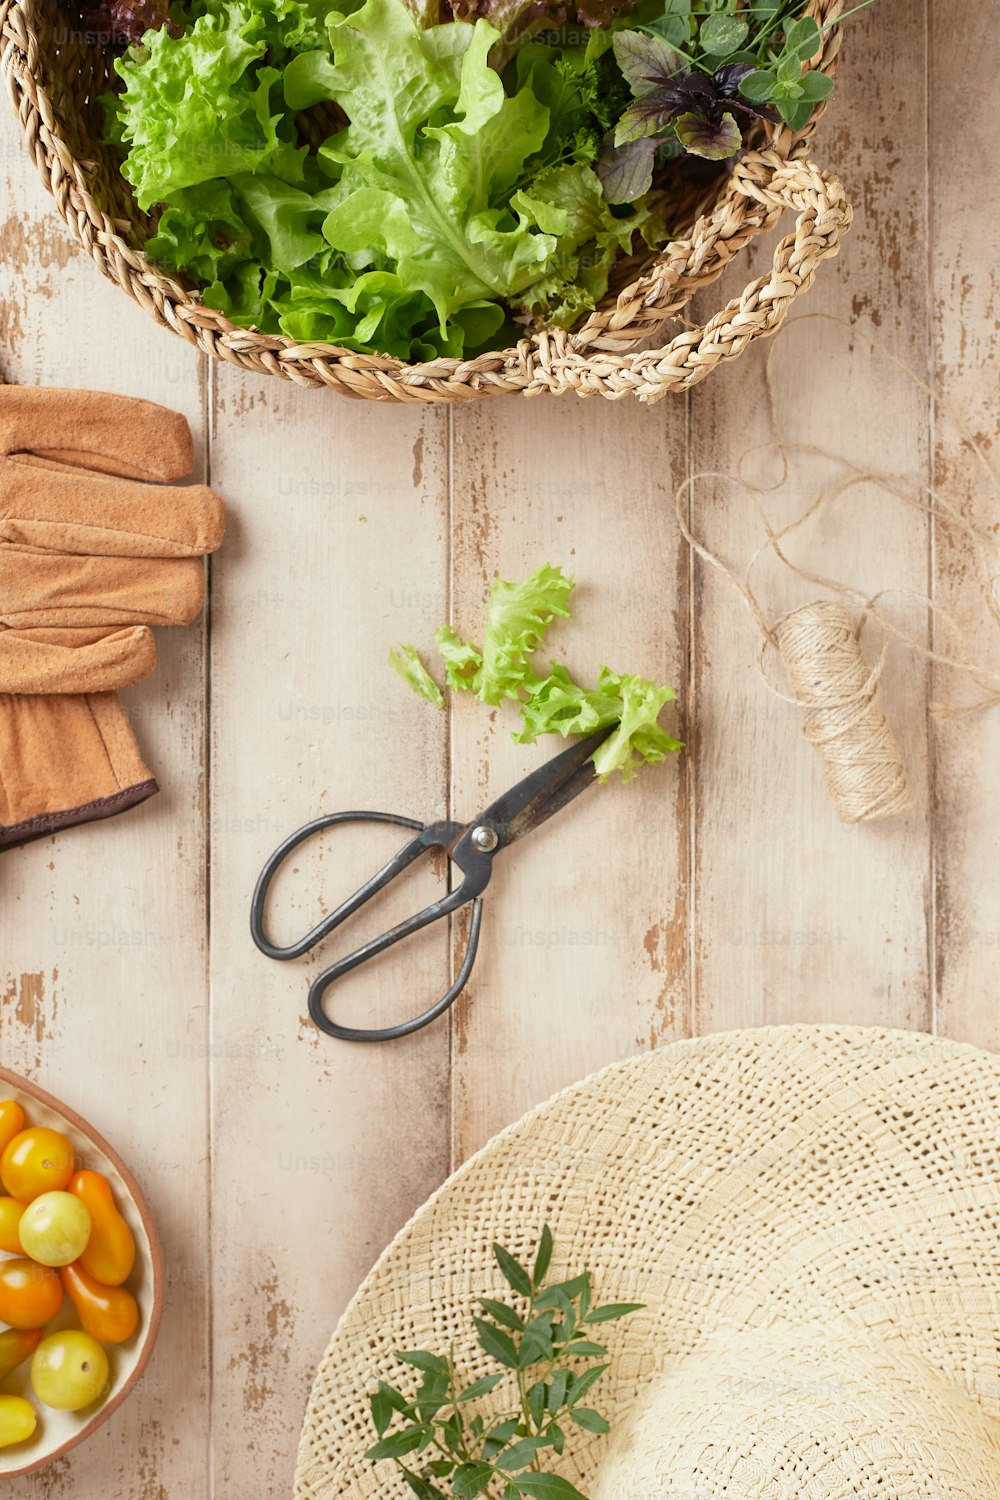 a basket of lettuce next to a hat and a pair of scissors